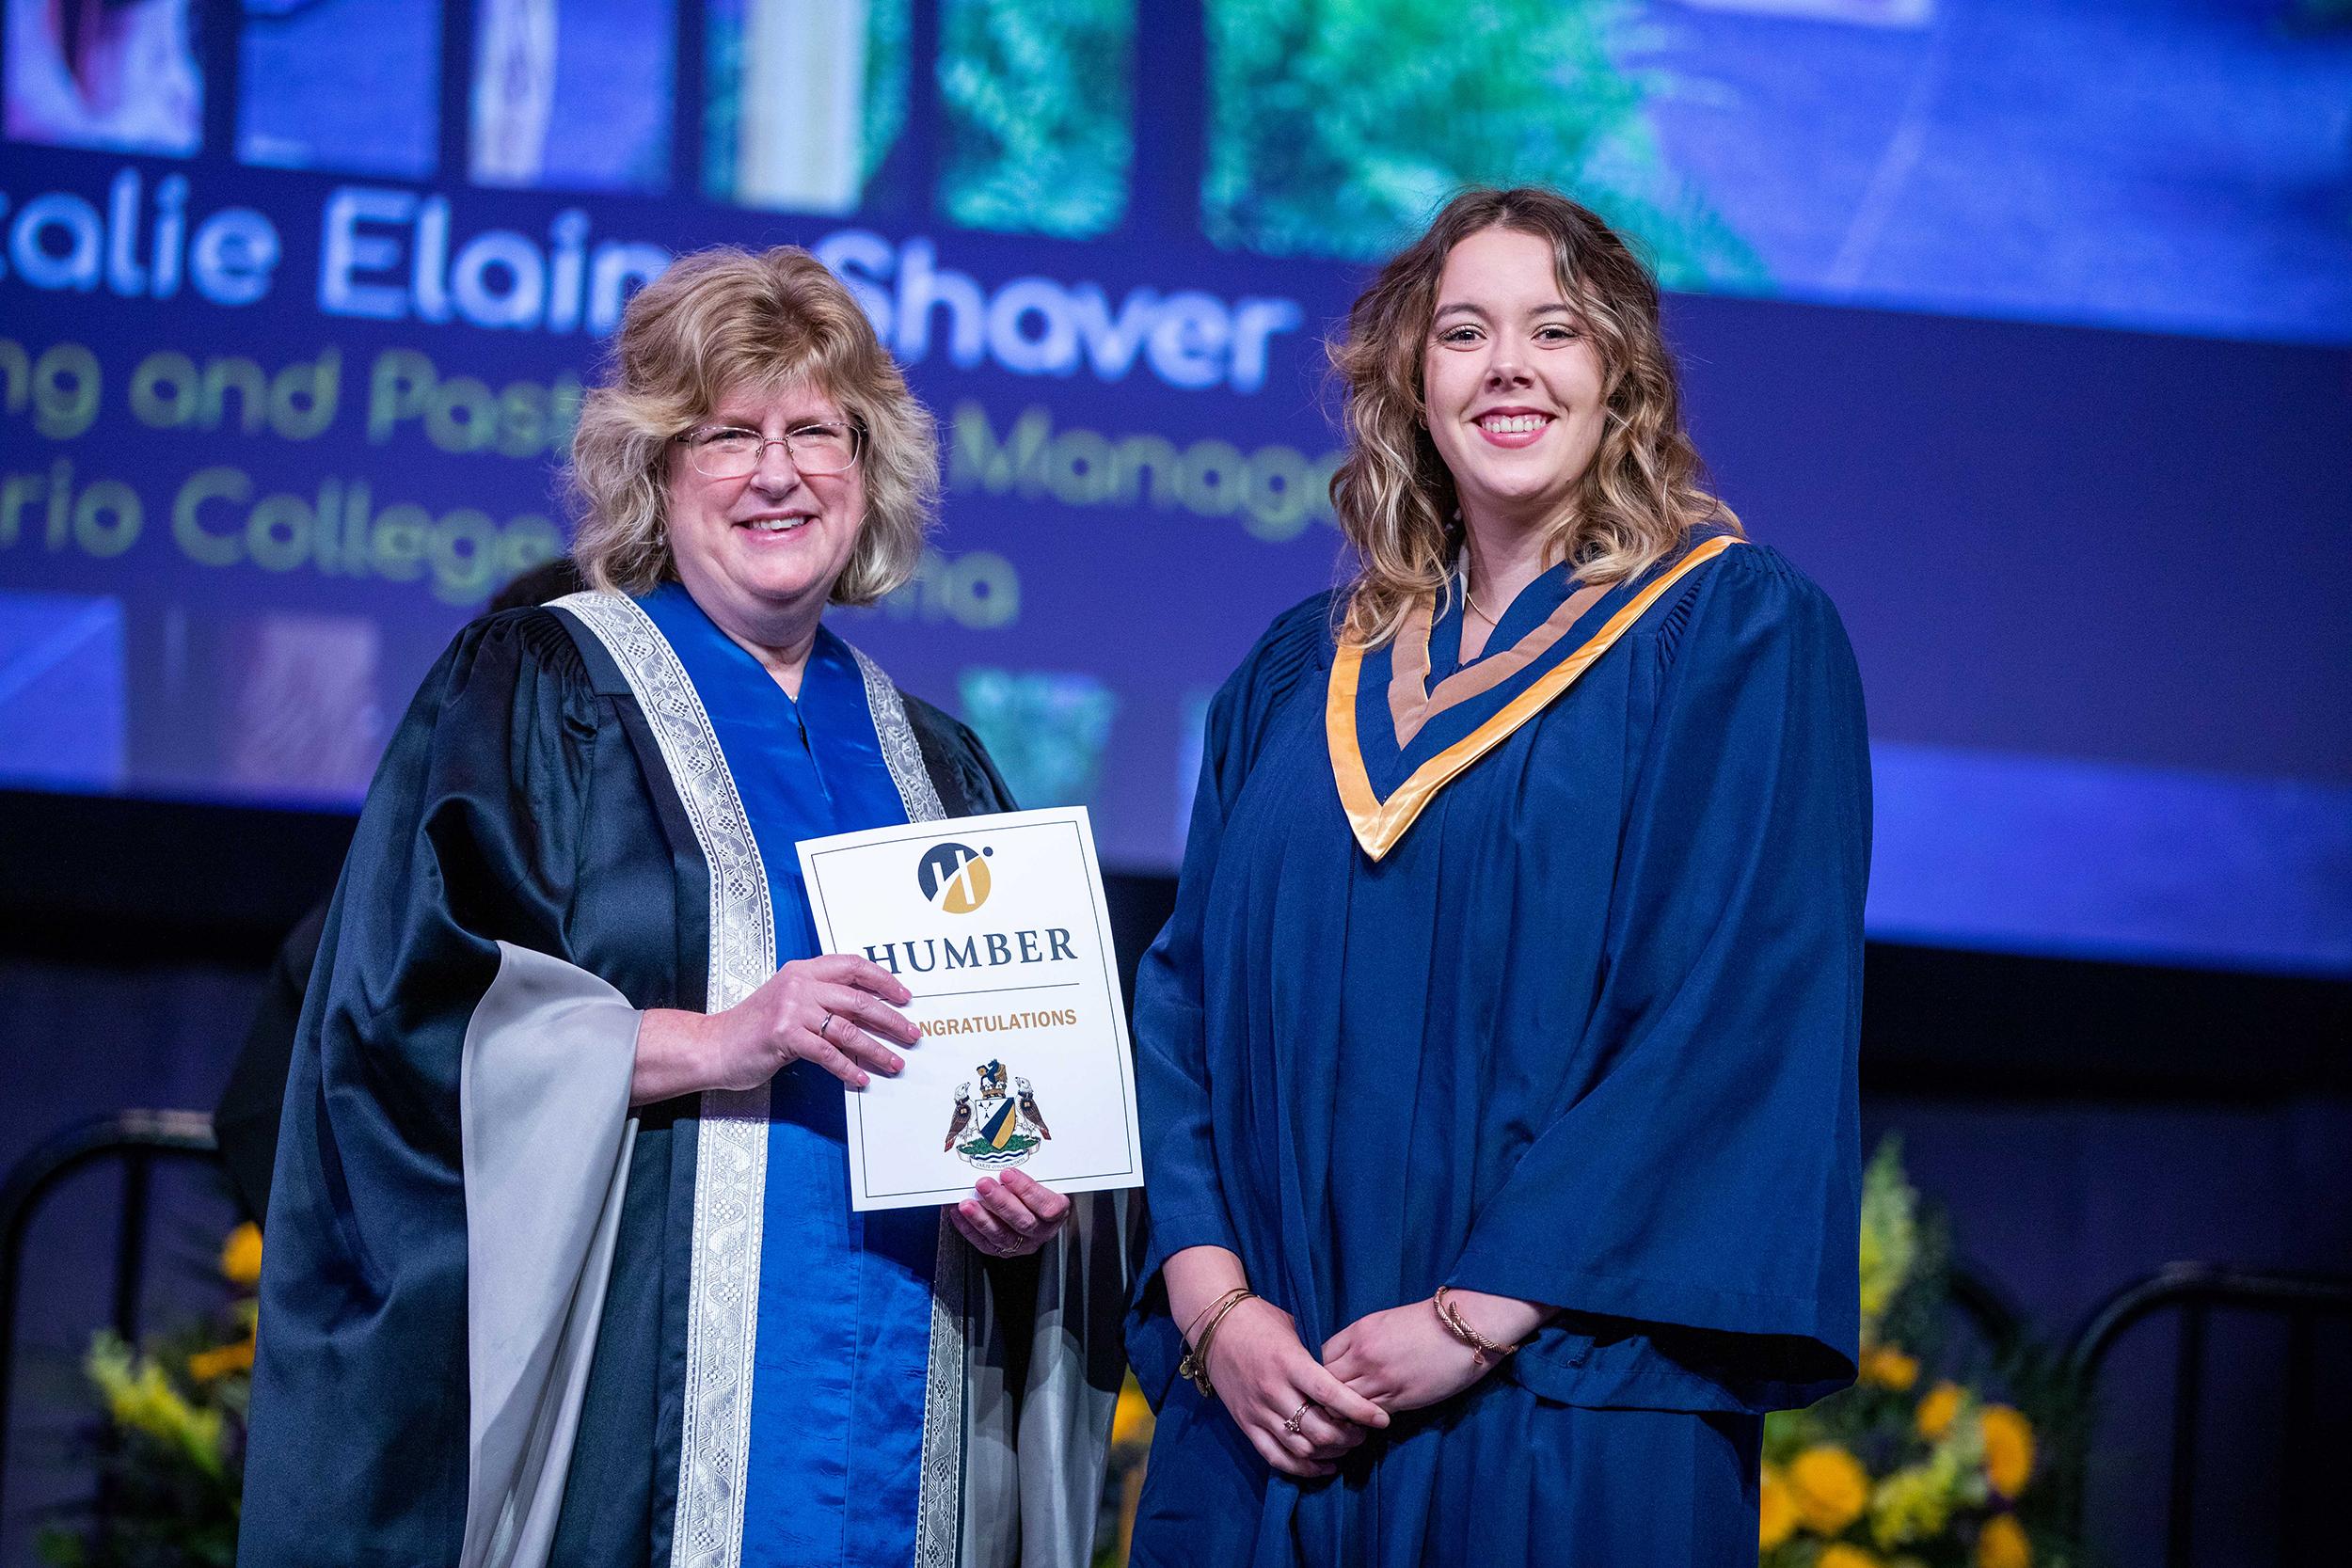 Two people wearing robes stand on a stage. One is holding a piece of paper that reads Humber Congratulations on it.